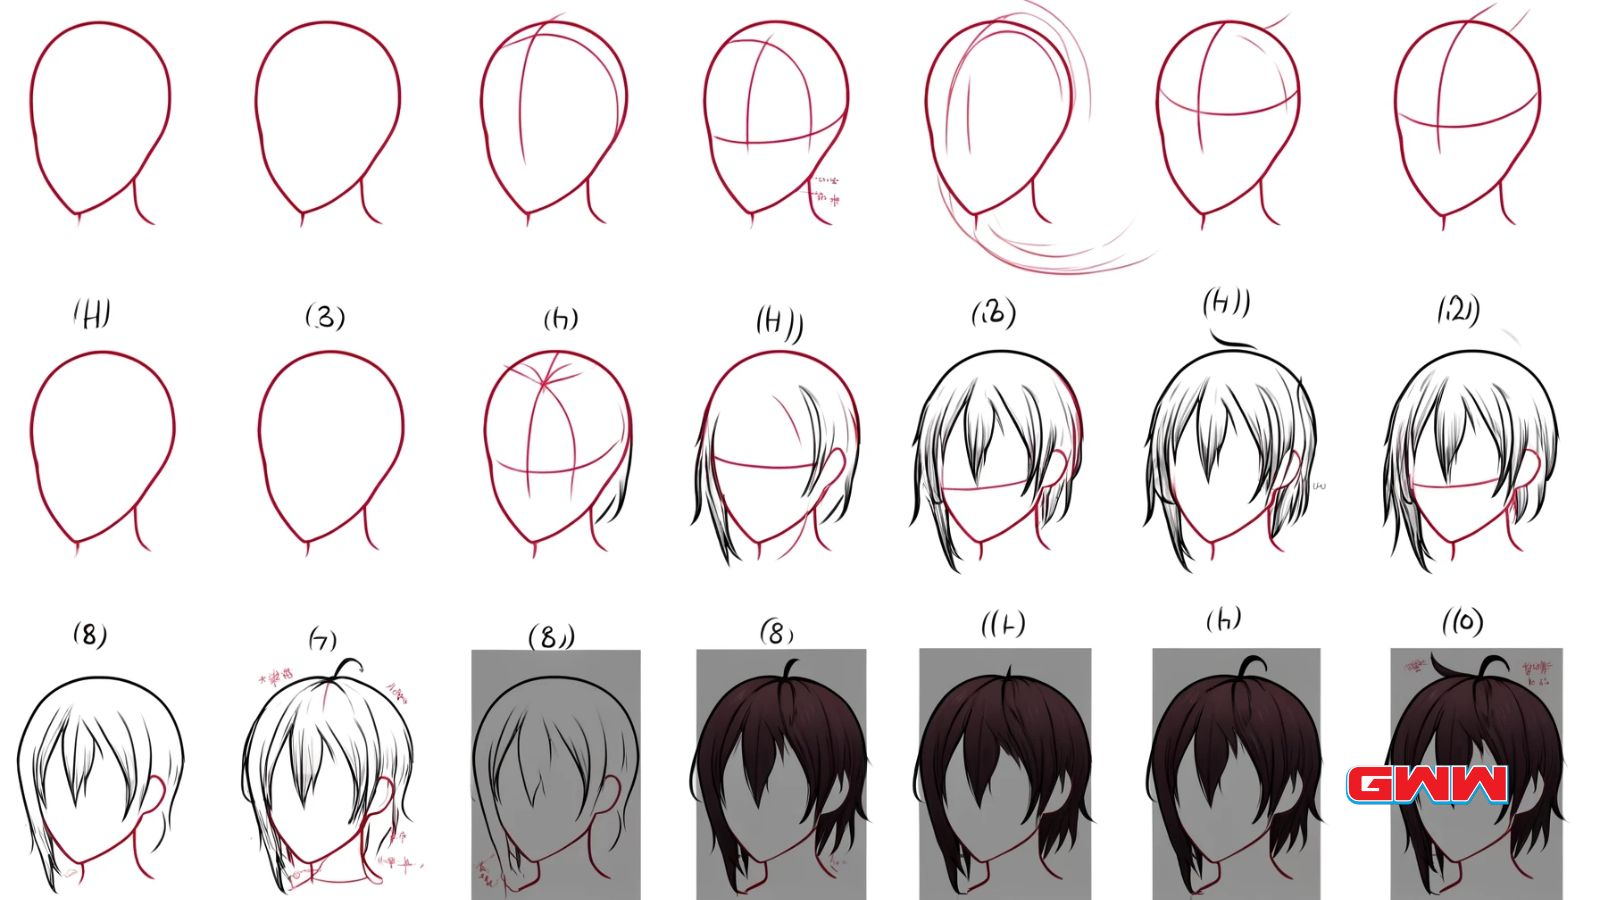 Anime girl hair step-by-step tutorial for drawing hairstyles